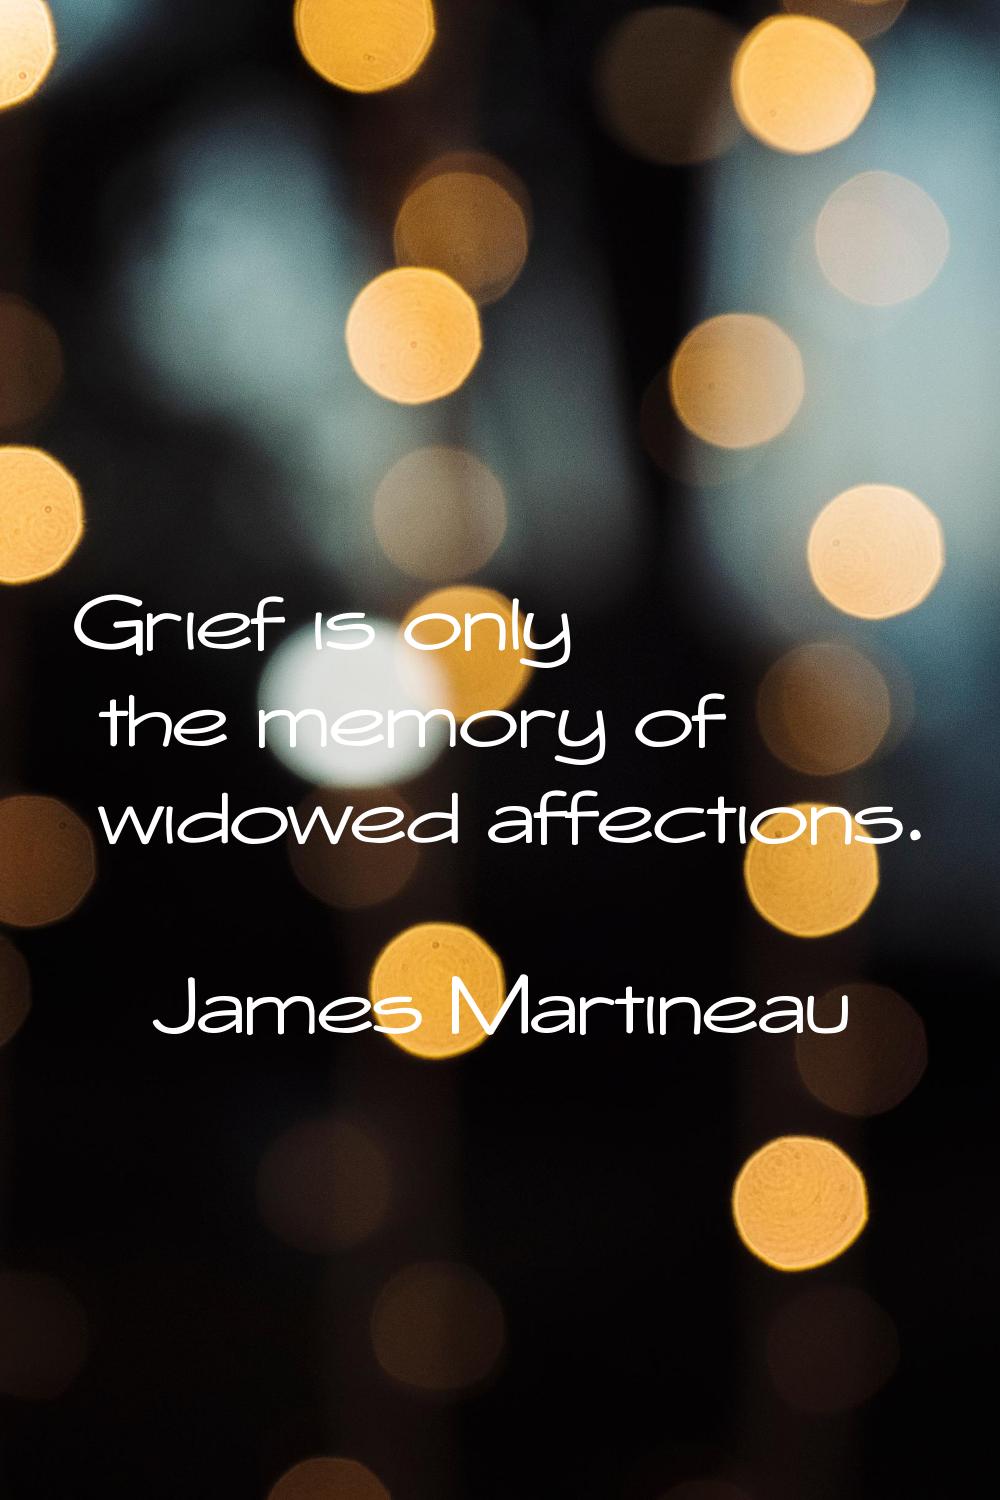 Grief is only the memory of widowed affections.